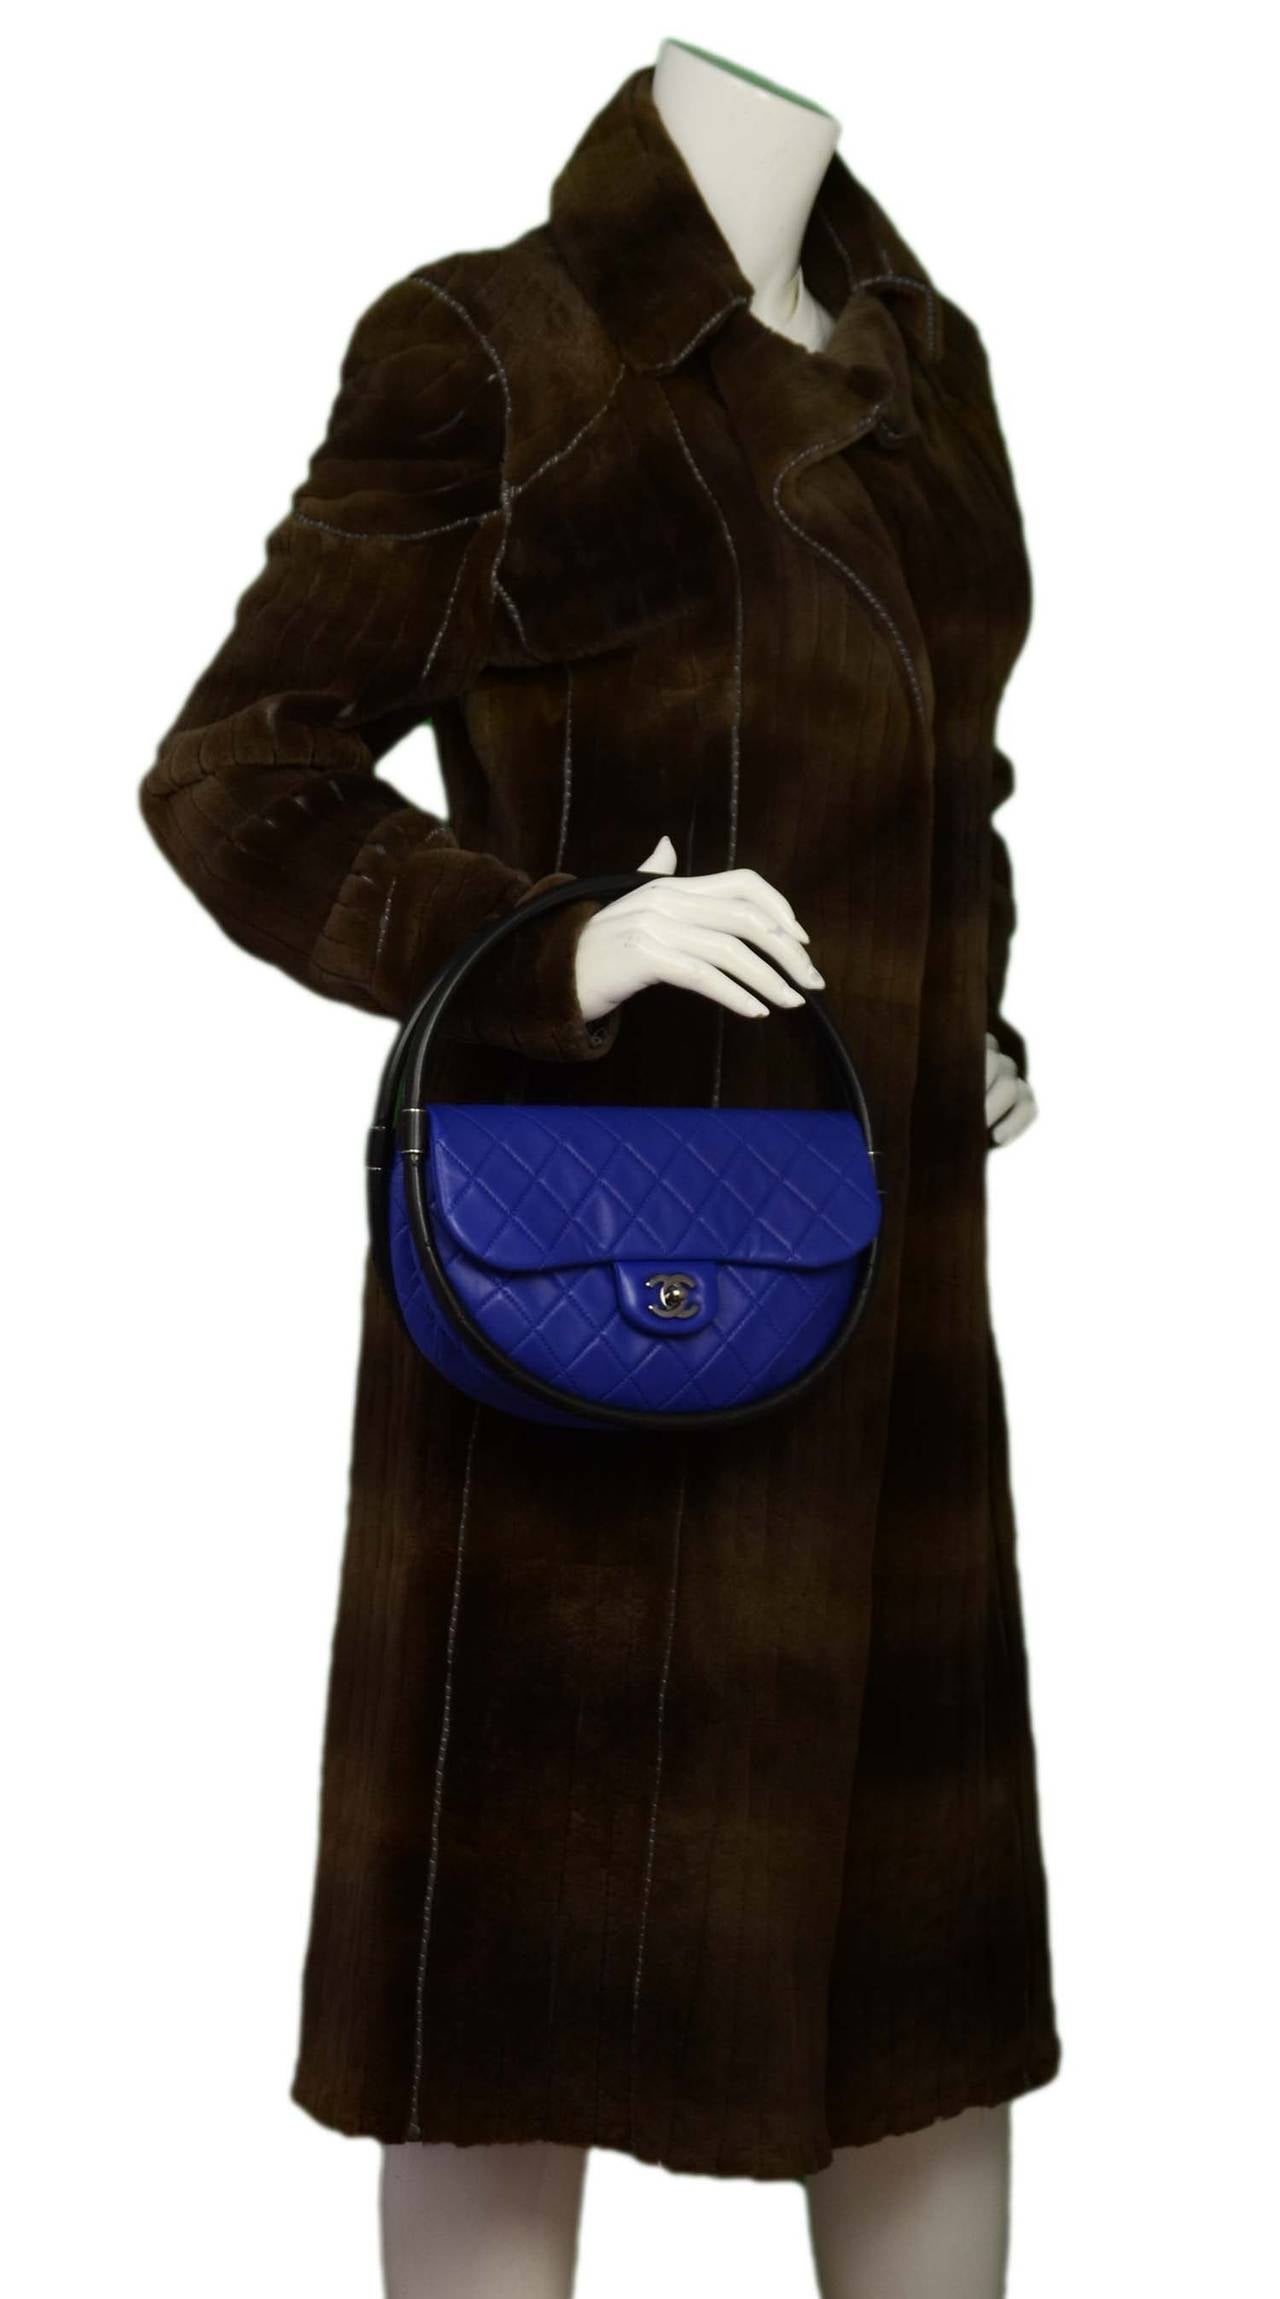 CHANEL Cobalt Blue Quilted Leather Ltd Edt Small Hula Hoop Bag rt. $2, 700 5